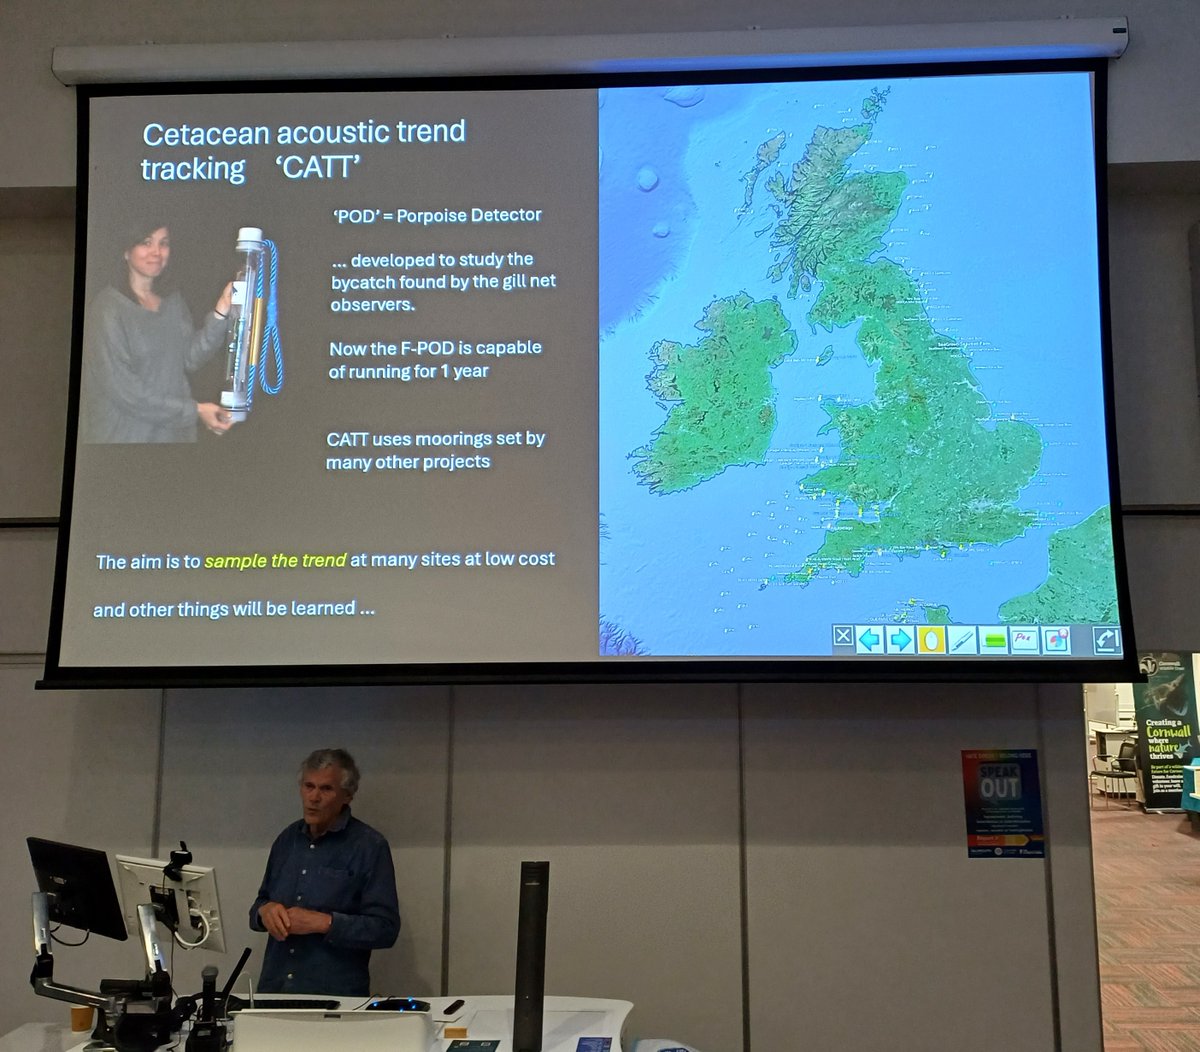 Nick Tregenza with a picture of Stella Turk at the Cornwall Wildlife Trust Recorders Event today. Nick talked about the past, present and future of Cetacean trend tracking around Cornwall, and the development of his F-POD passive acoustic monitoring device.